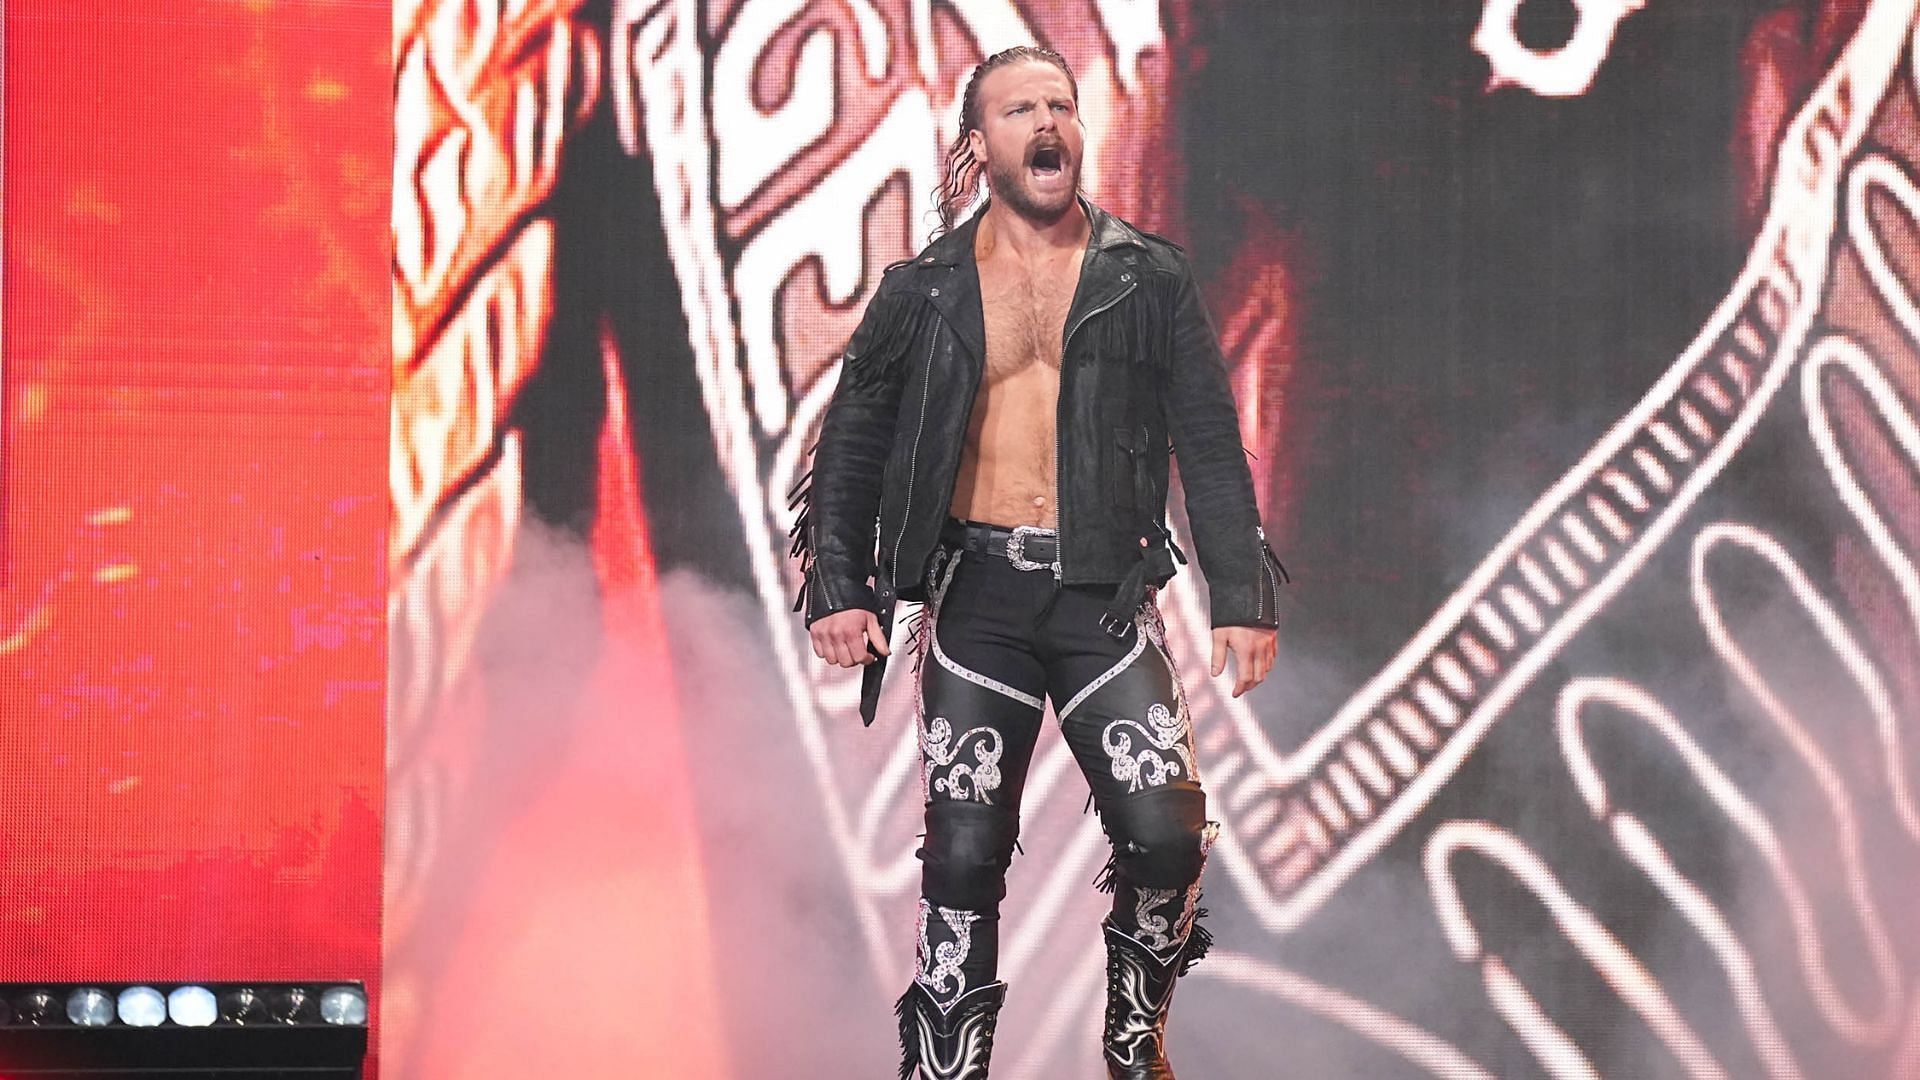 Hangman Adam Page is a former AEW World Champion [Photo courtesy of AEW Official Website]